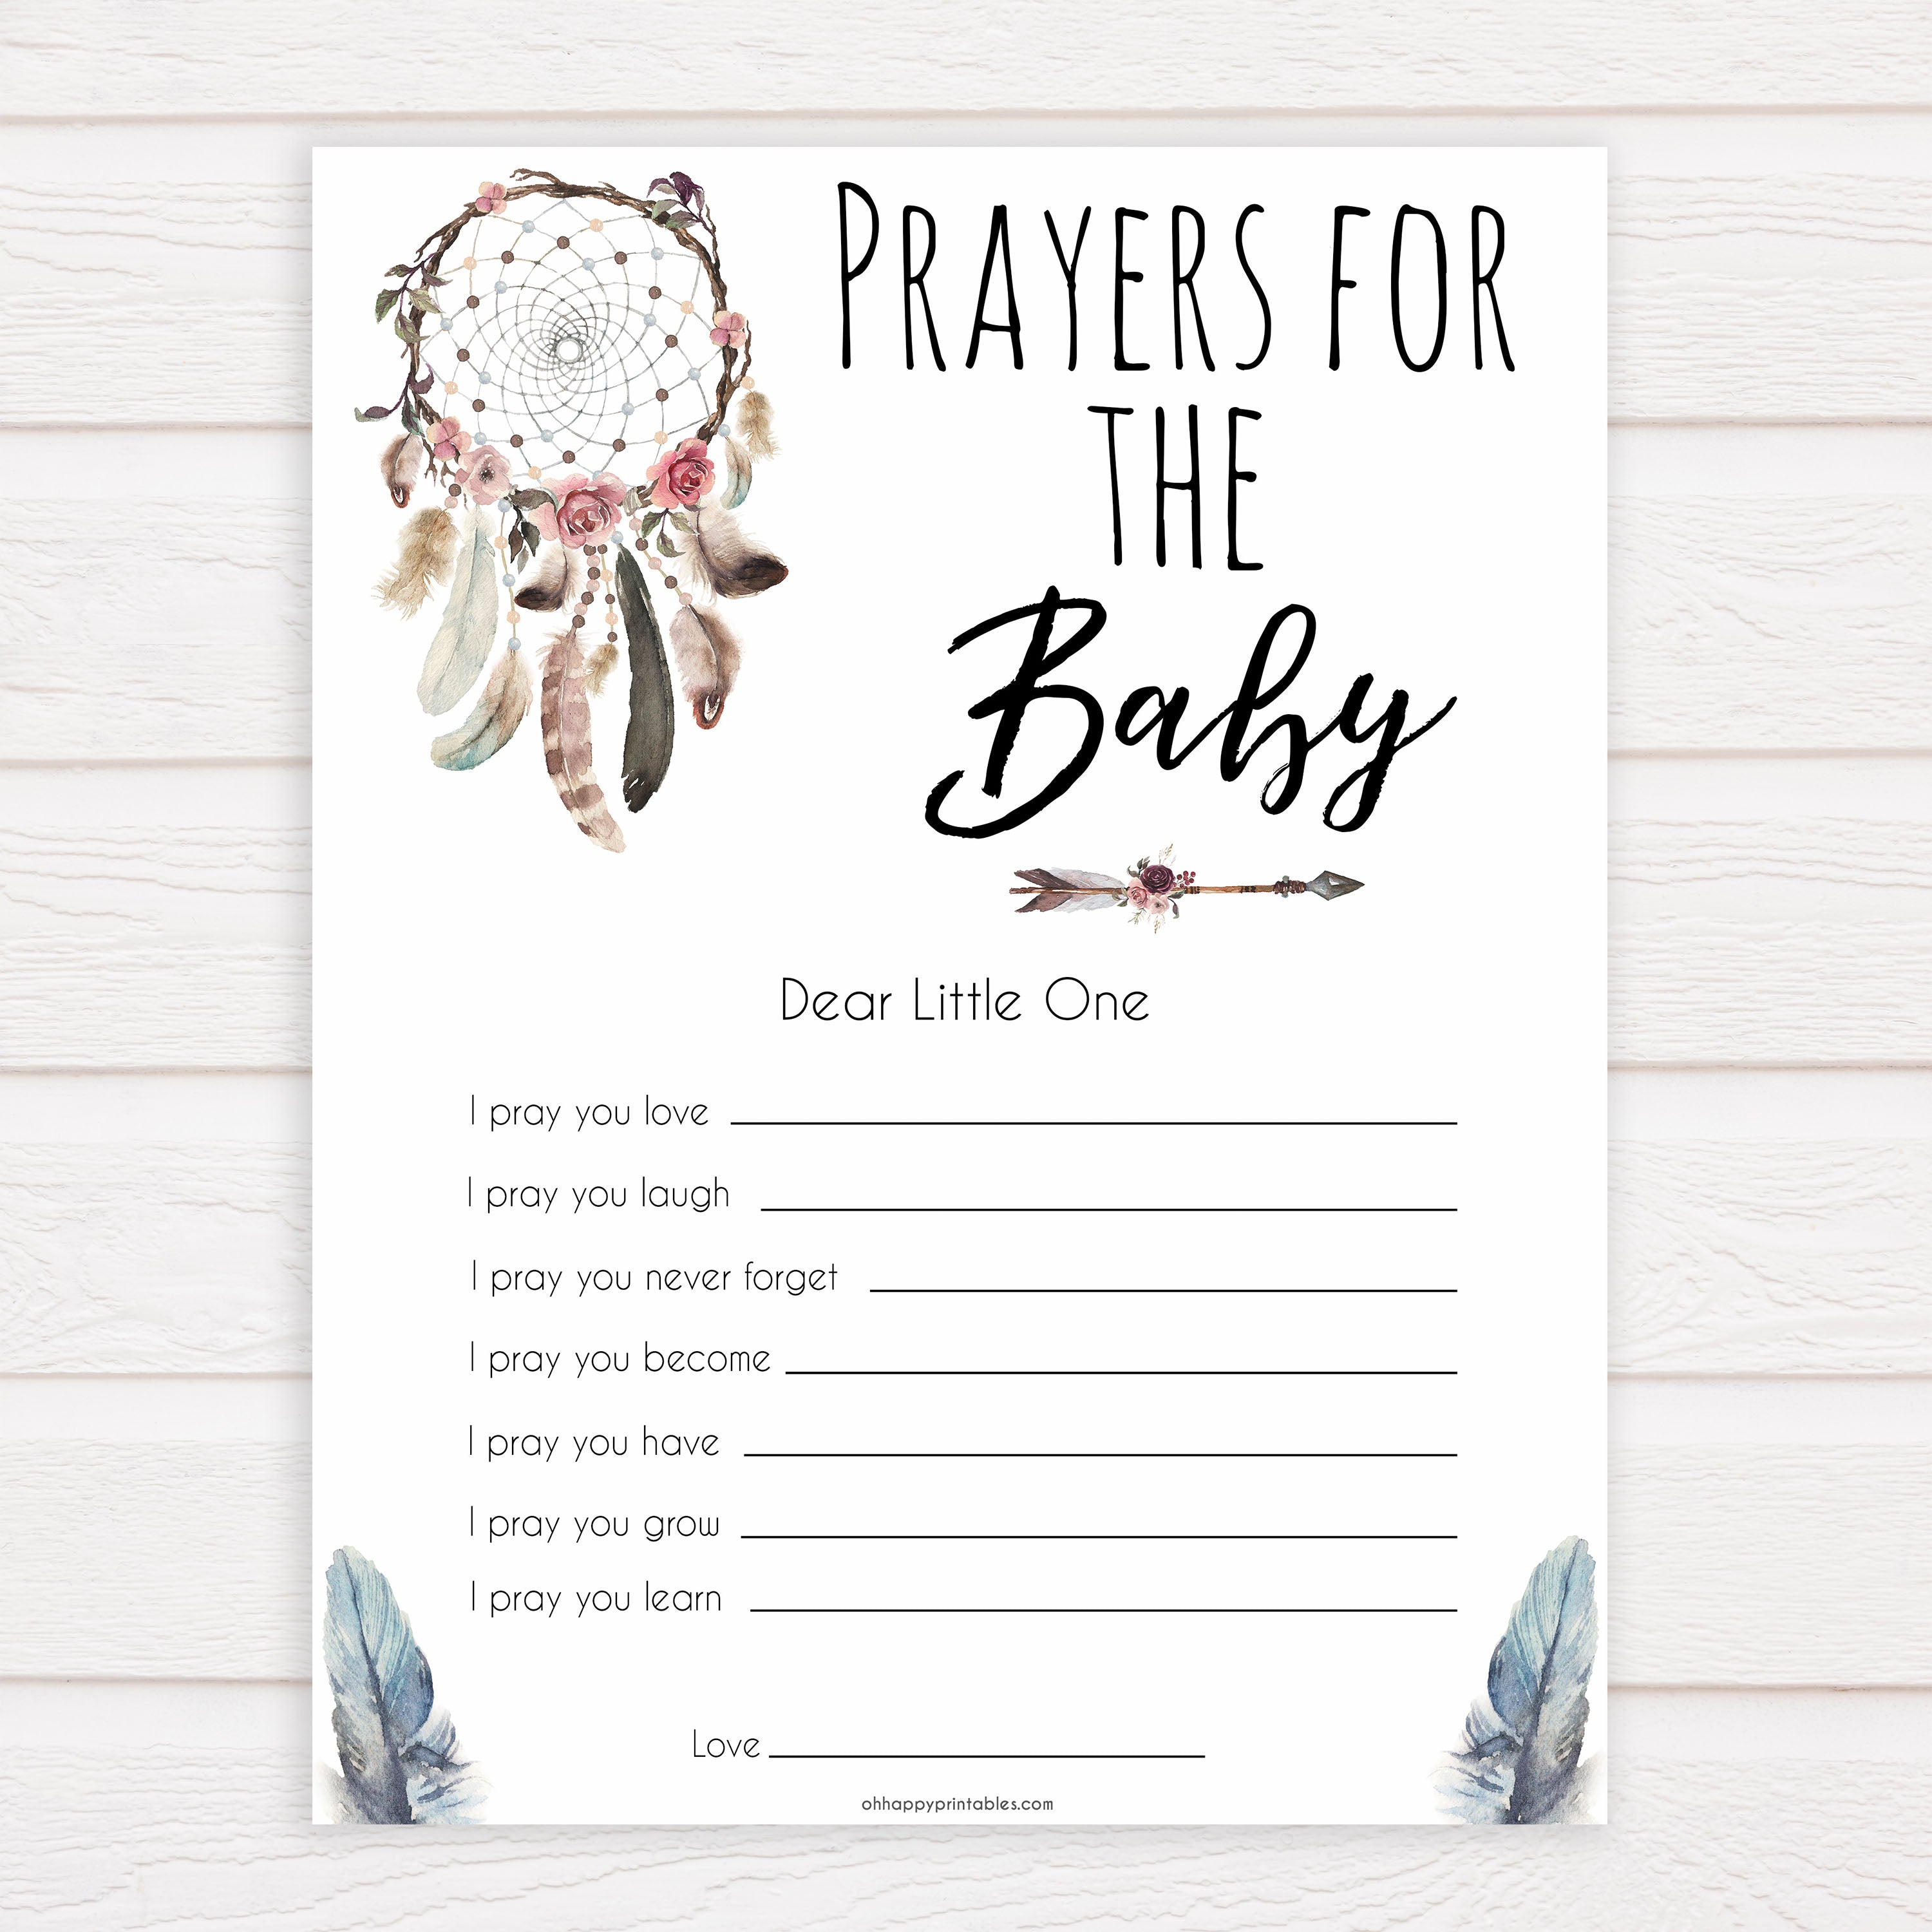 Boho baby games, prayers for the baby baby game, fun baby games, printable baby games, top 10 baby games, boho baby shower, baby games, hilarious baby games